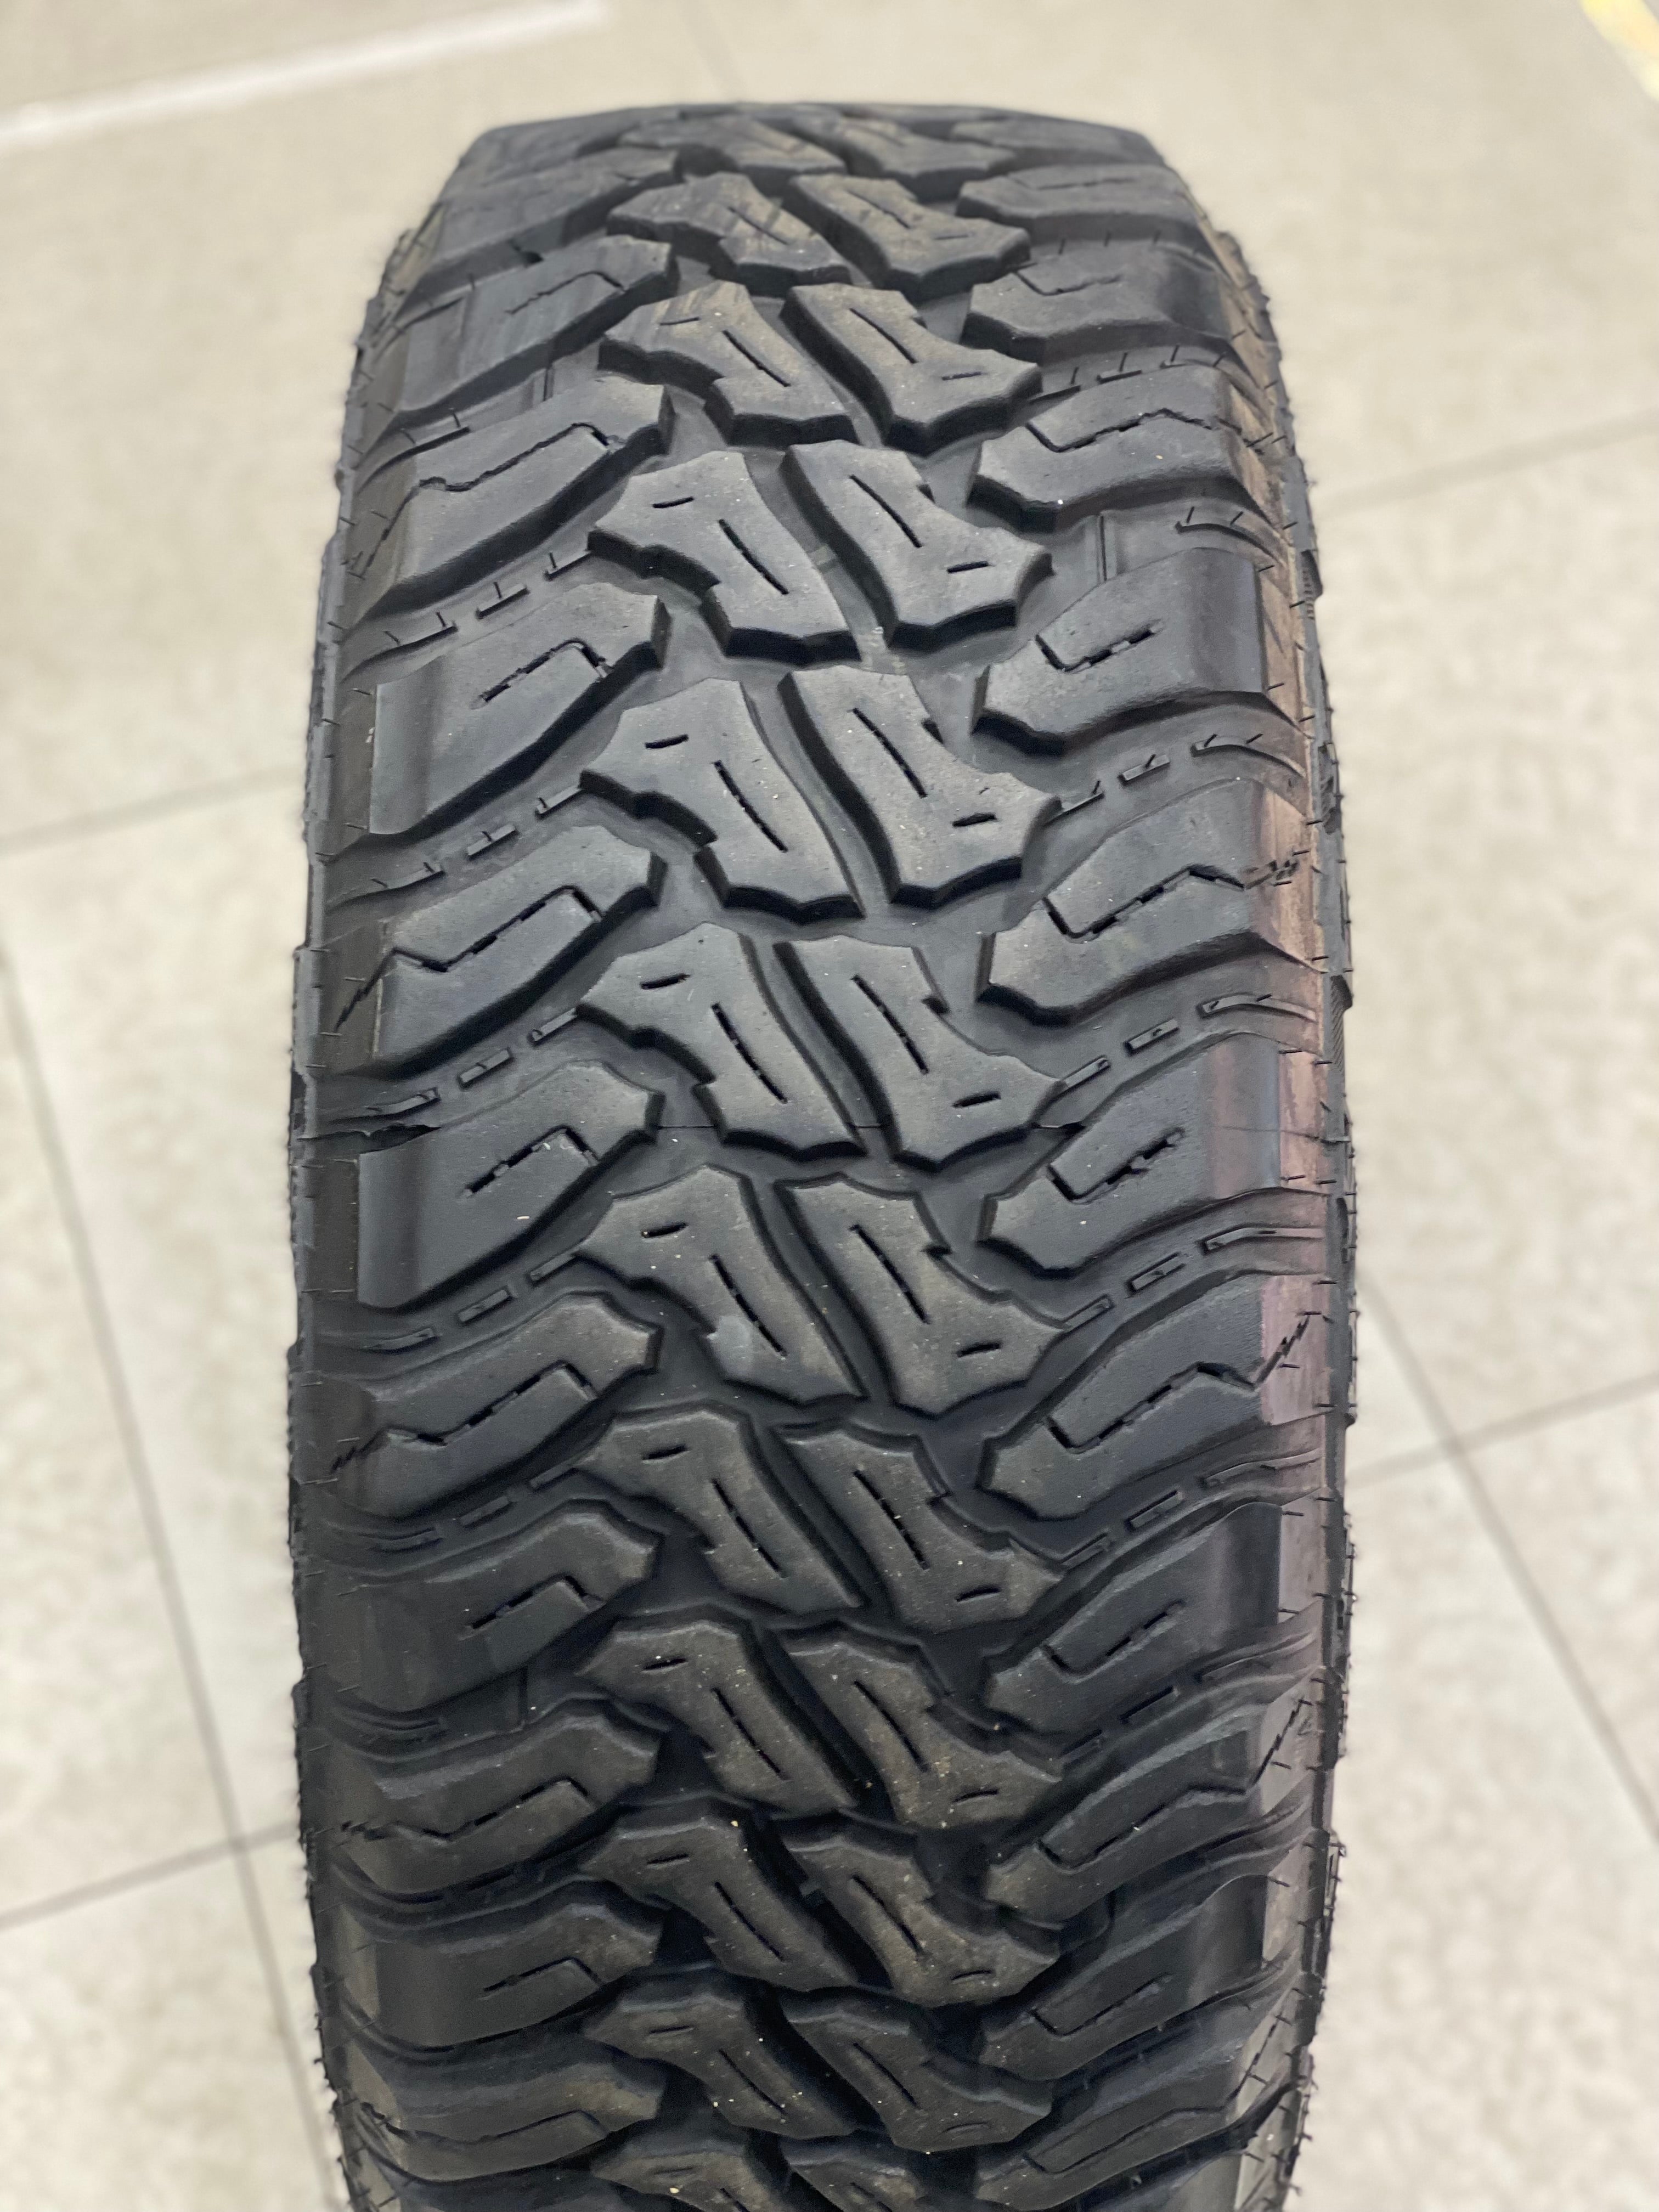 275/55/20 Accelera M/T 01 used tyre 99% life